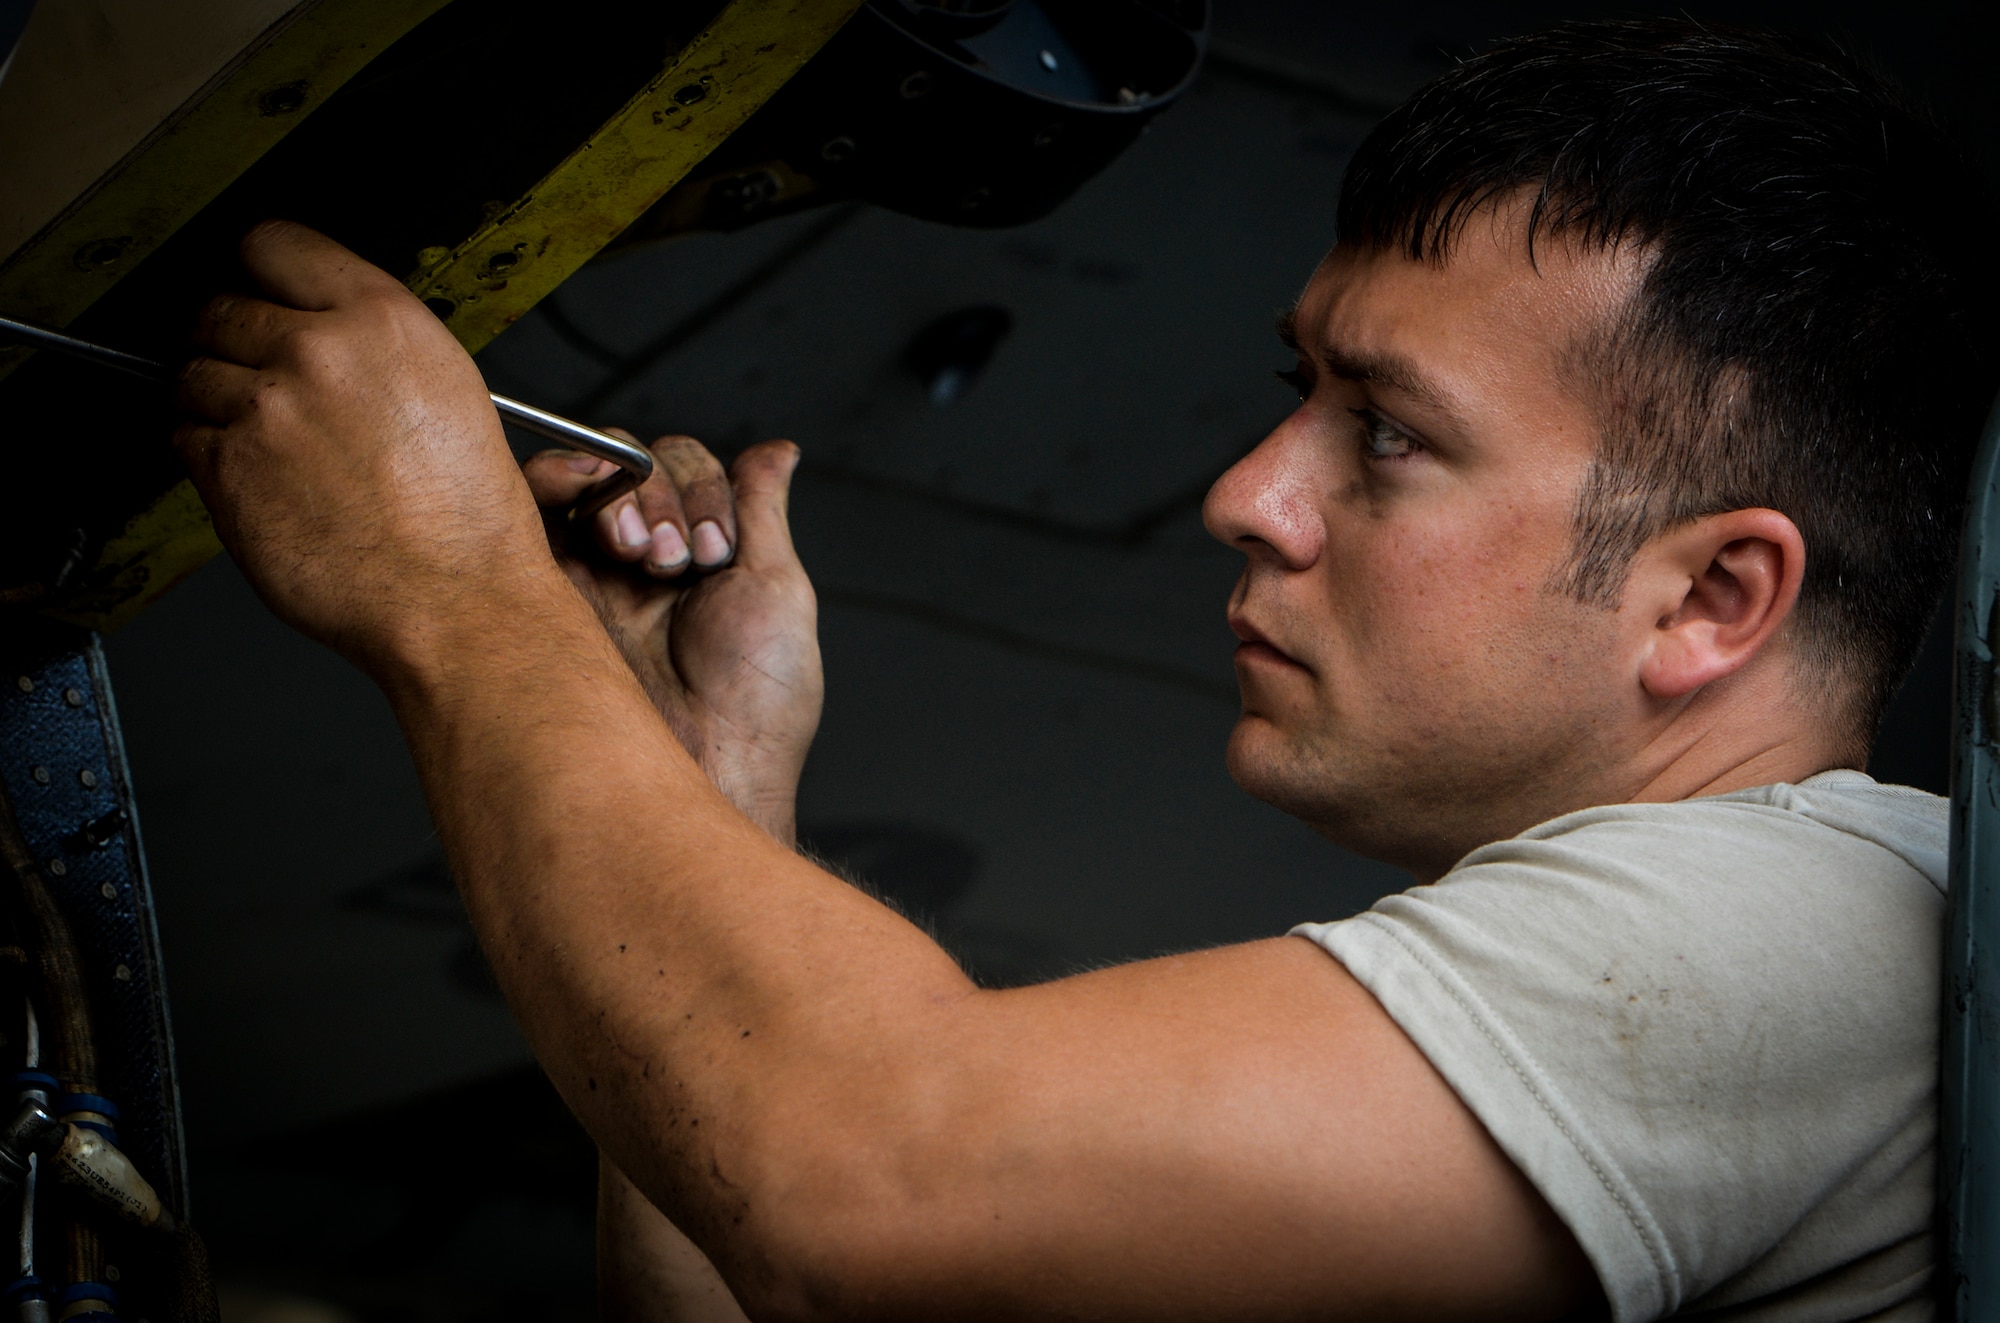 Senior Airman Chad Pearsall, 8th AMU crew chief, unscrews a panel from a CV-22 Osprey on Hurlburt Field, Fla., Aug. 8, 2014. Crew chiefs are responsible for day-to-day maintenance, including preflight, postflight, special inspections and phase inspections. (U.S. Air Force photo/Senior Airman Christopher Callaway) 